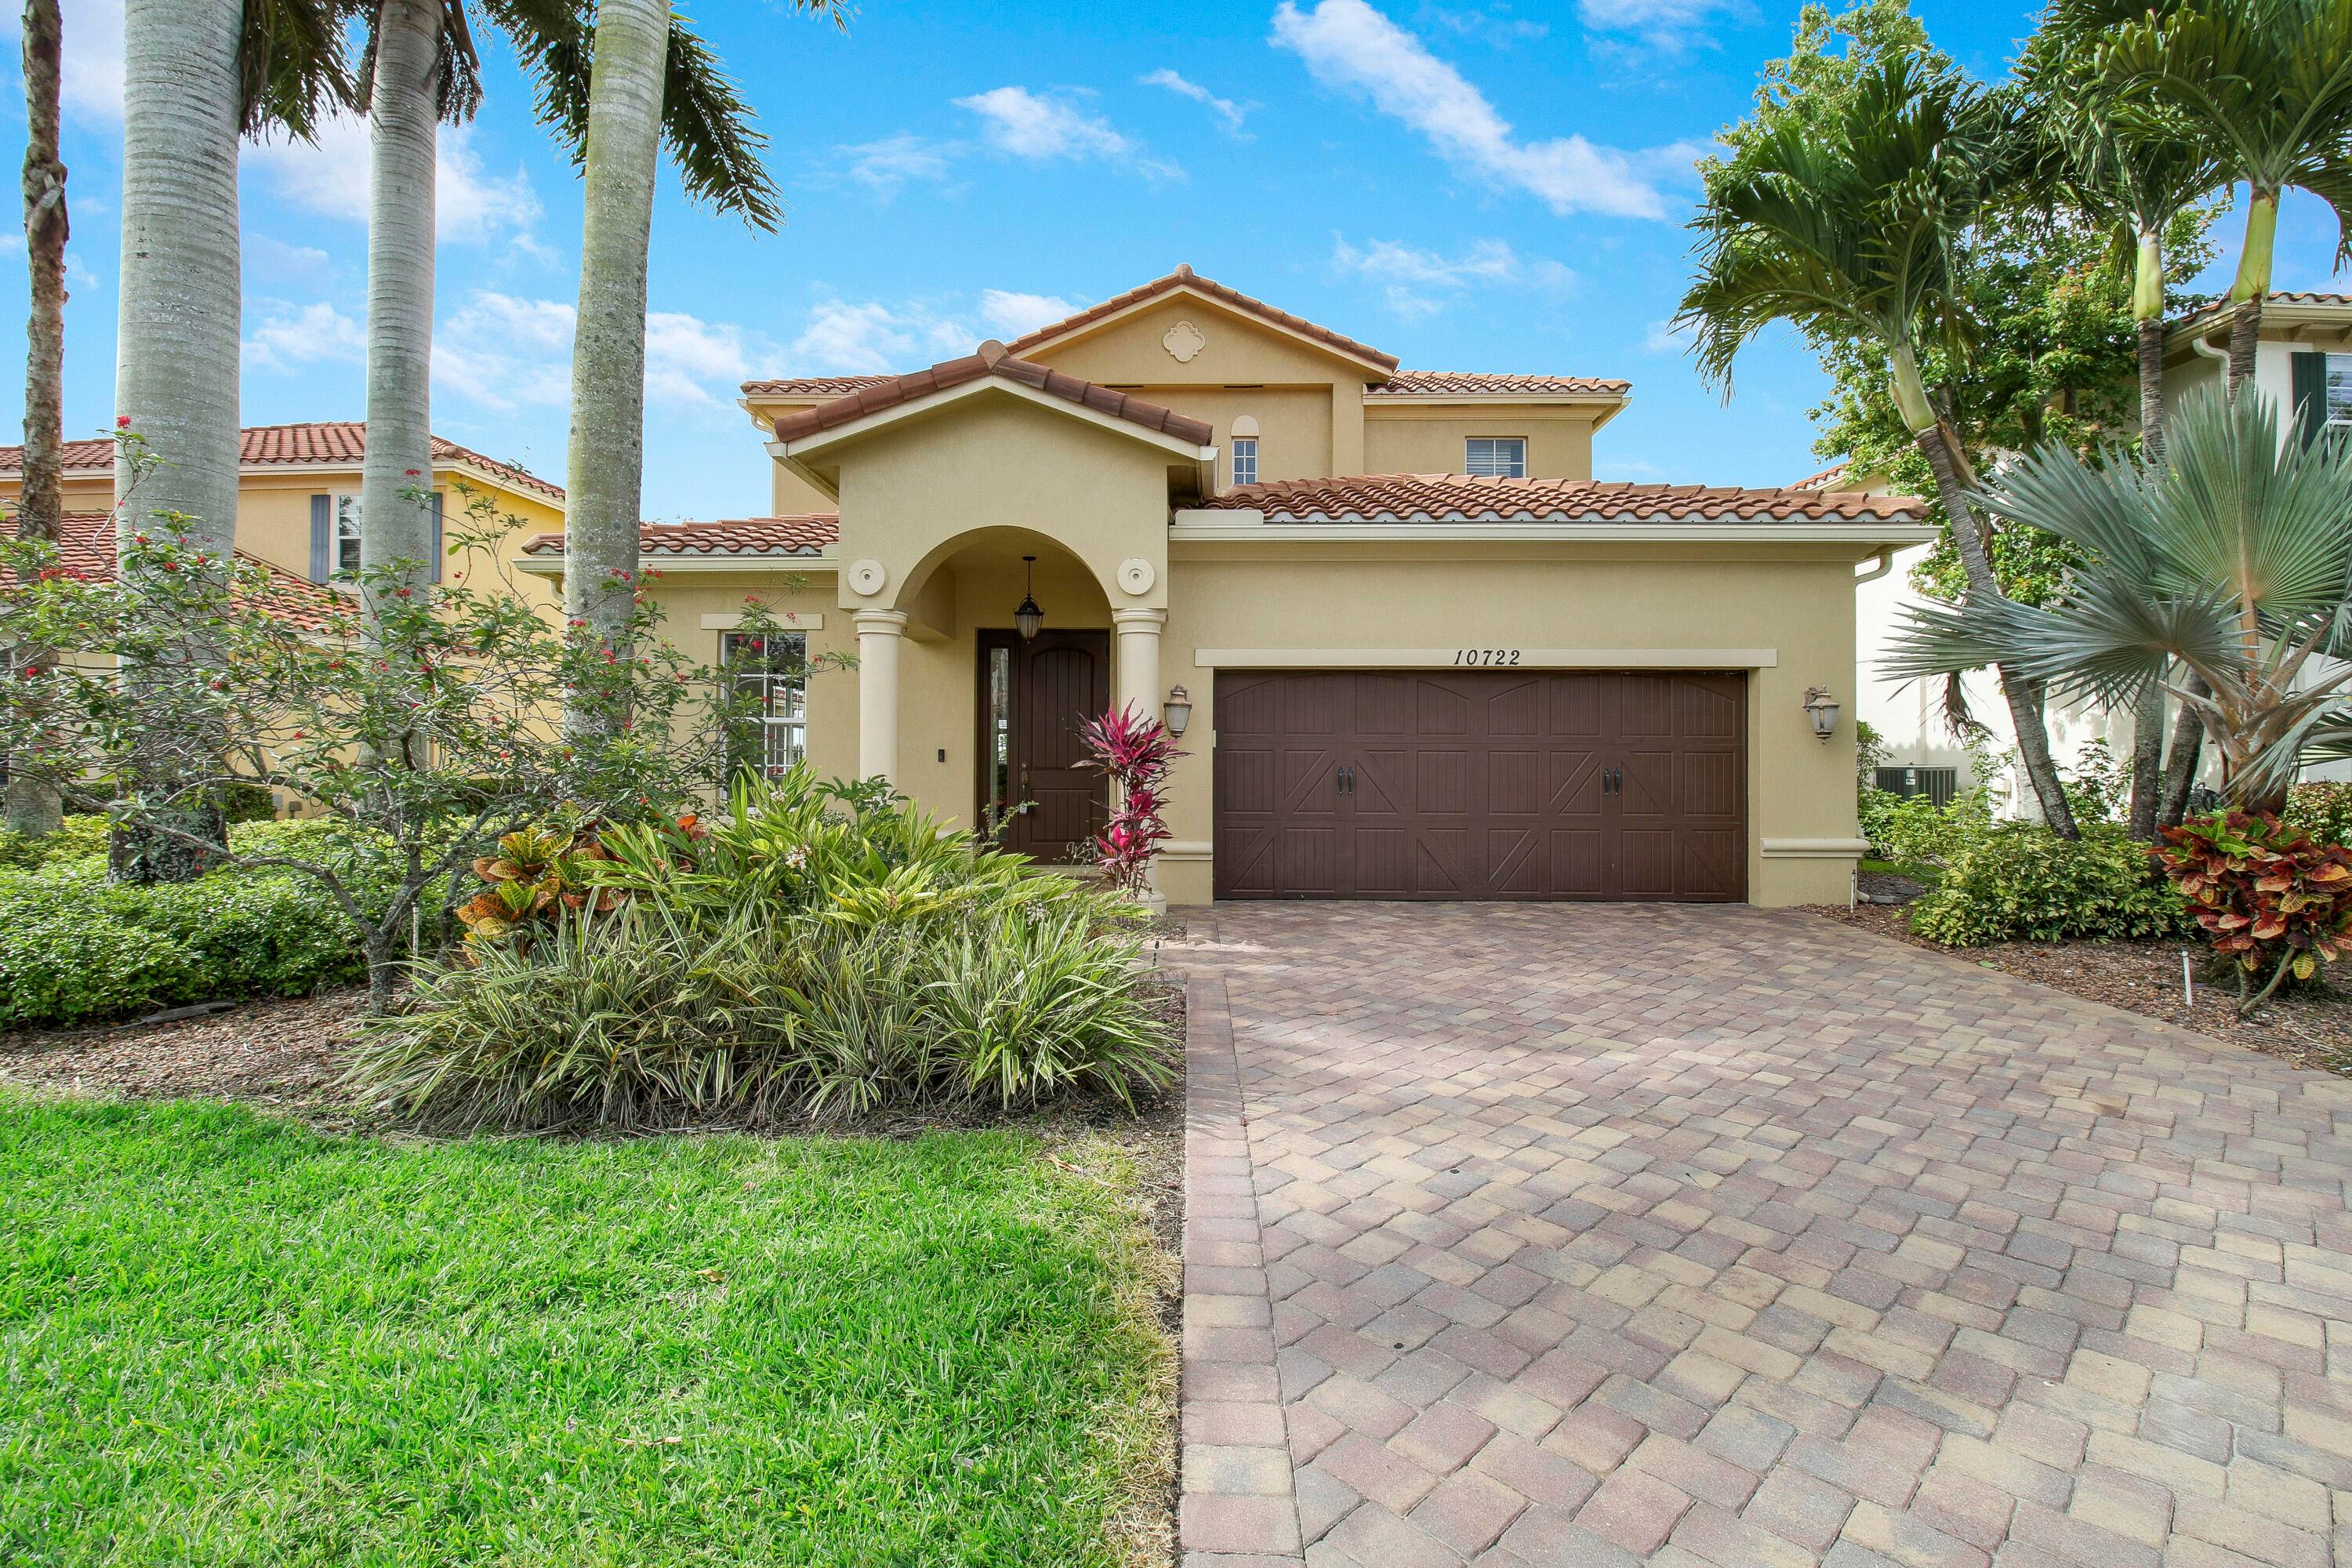 Welcome home to 10722 Willow Oak Court in beautiful Wellington, Florida.